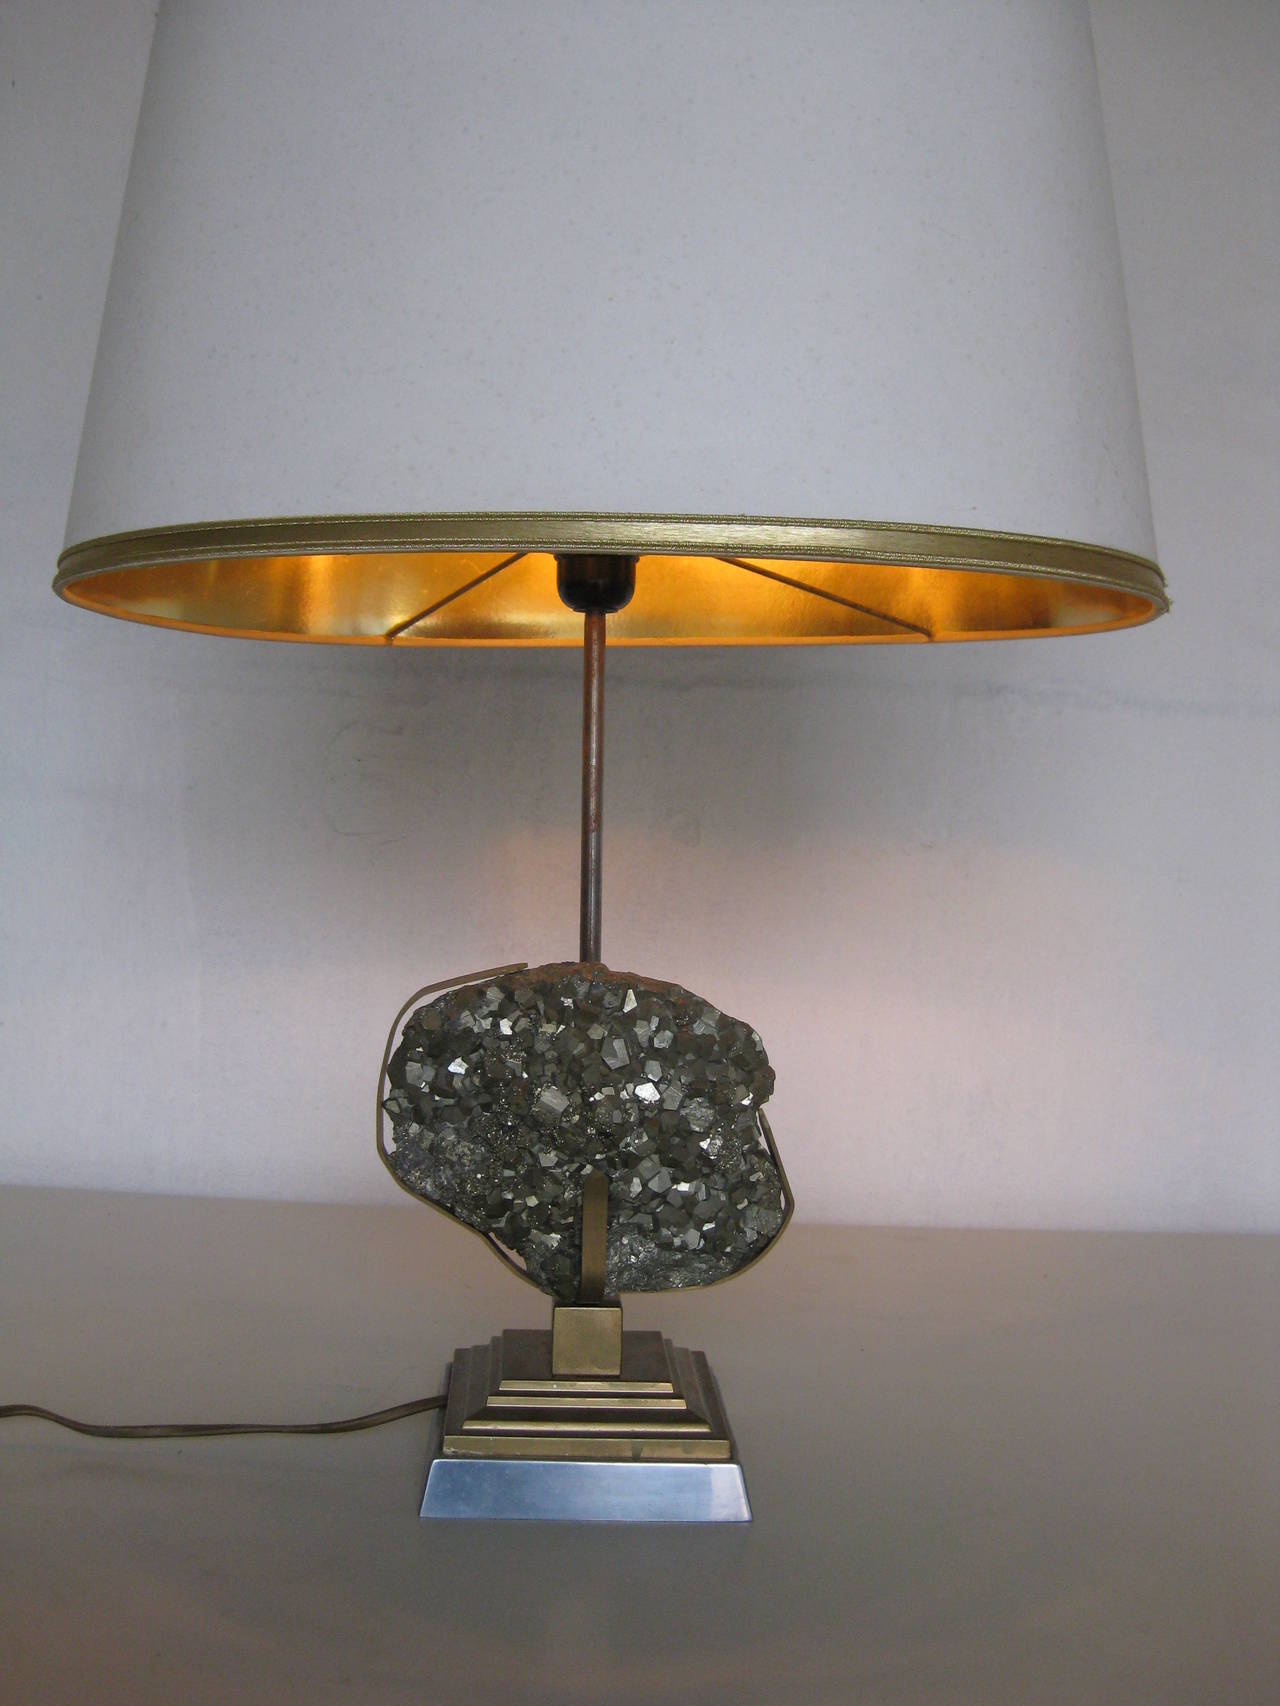 ... Willy Daro Table Lamp image 3 ... - 241114_176_l